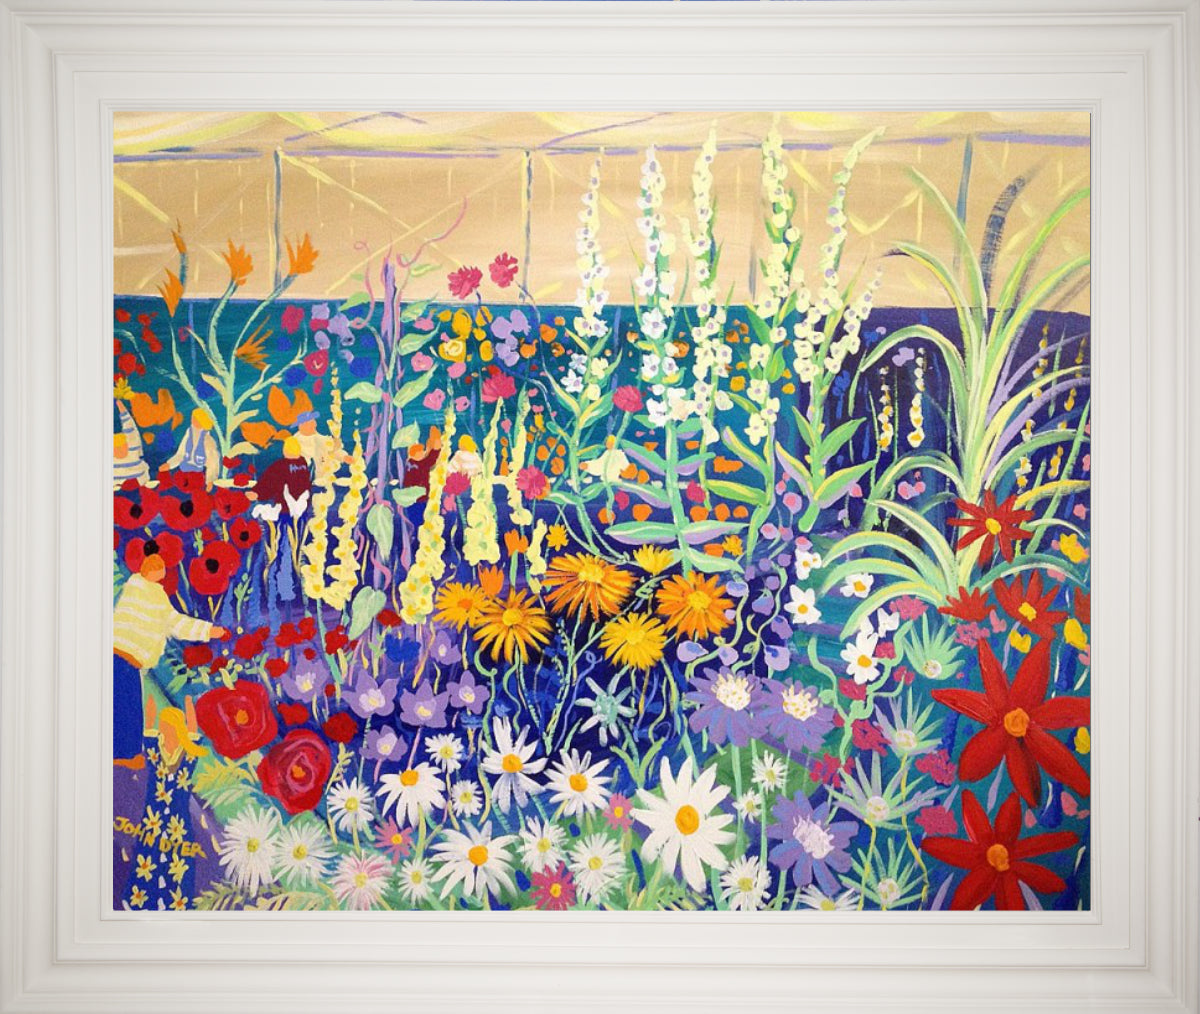 Garden Painting by John Dyer. 'Prize Blooms'. RHS Tent BBC Gardeners' World Live. Cornwall Art Gallery.